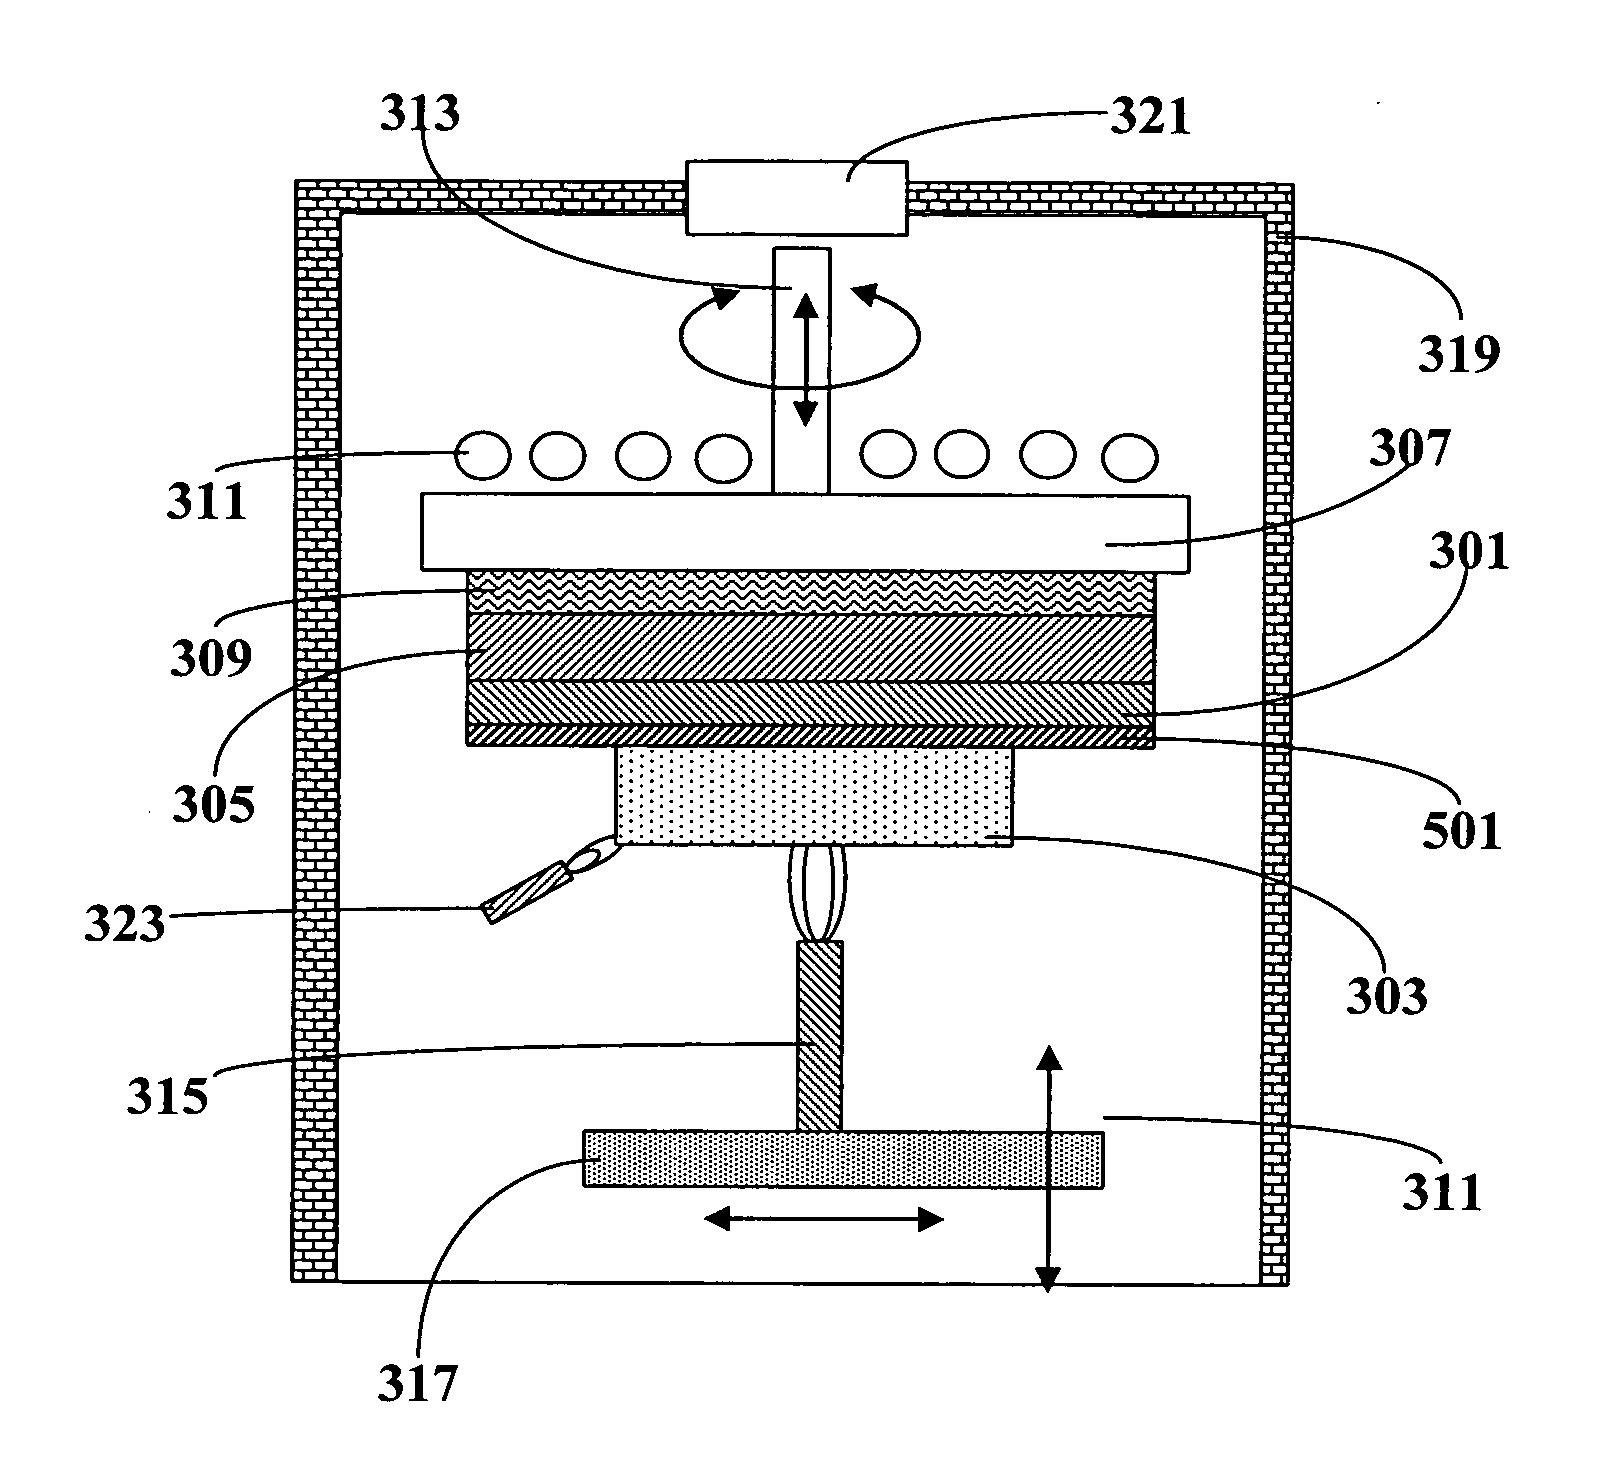 Method and apparatus for making fused silica